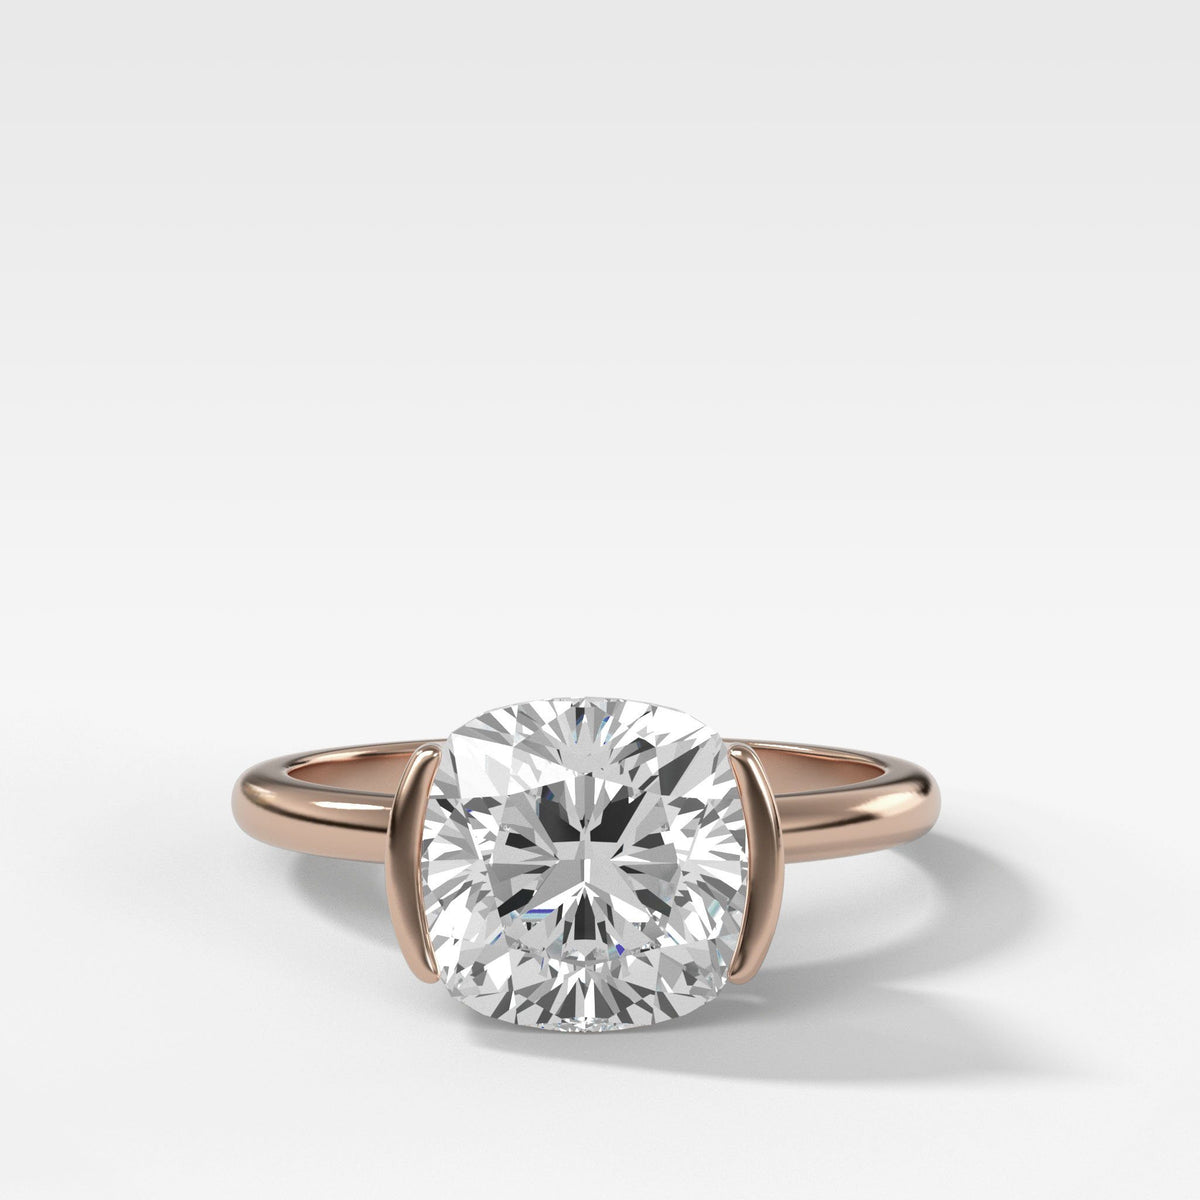 Half Bezel Solitaire Engagement Ring With Cushion Cut by Good Stone in Rose Gold